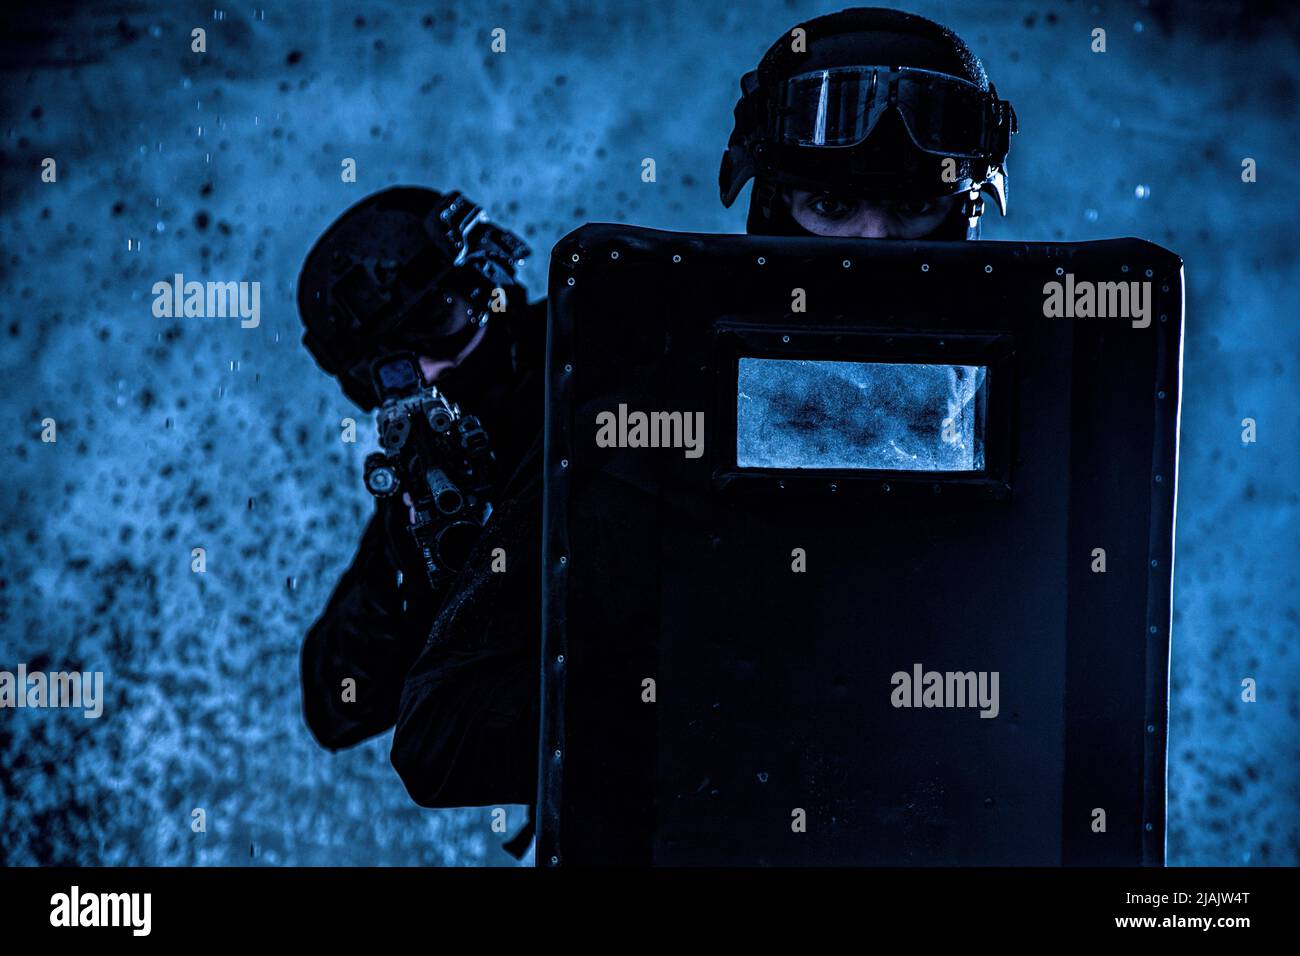 SWAT team officers protecting themselves behind ballistic shield as they move through a firefight. Stock Photo